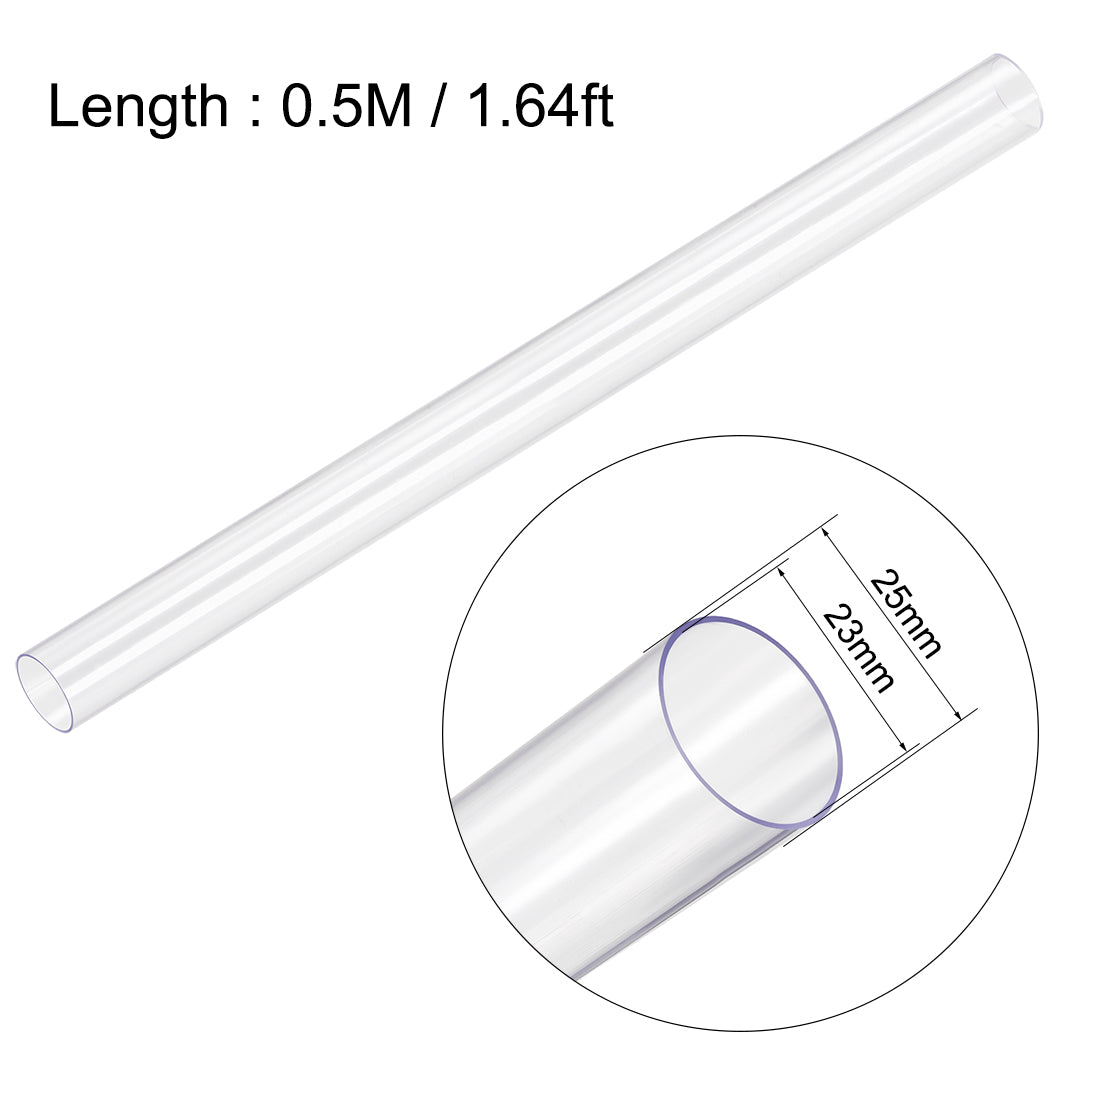 uxcell Uxcell PVC Rigid Round Tubing,Clear,23mm ID x 25mm OD,0.5M/1.64Ft Length